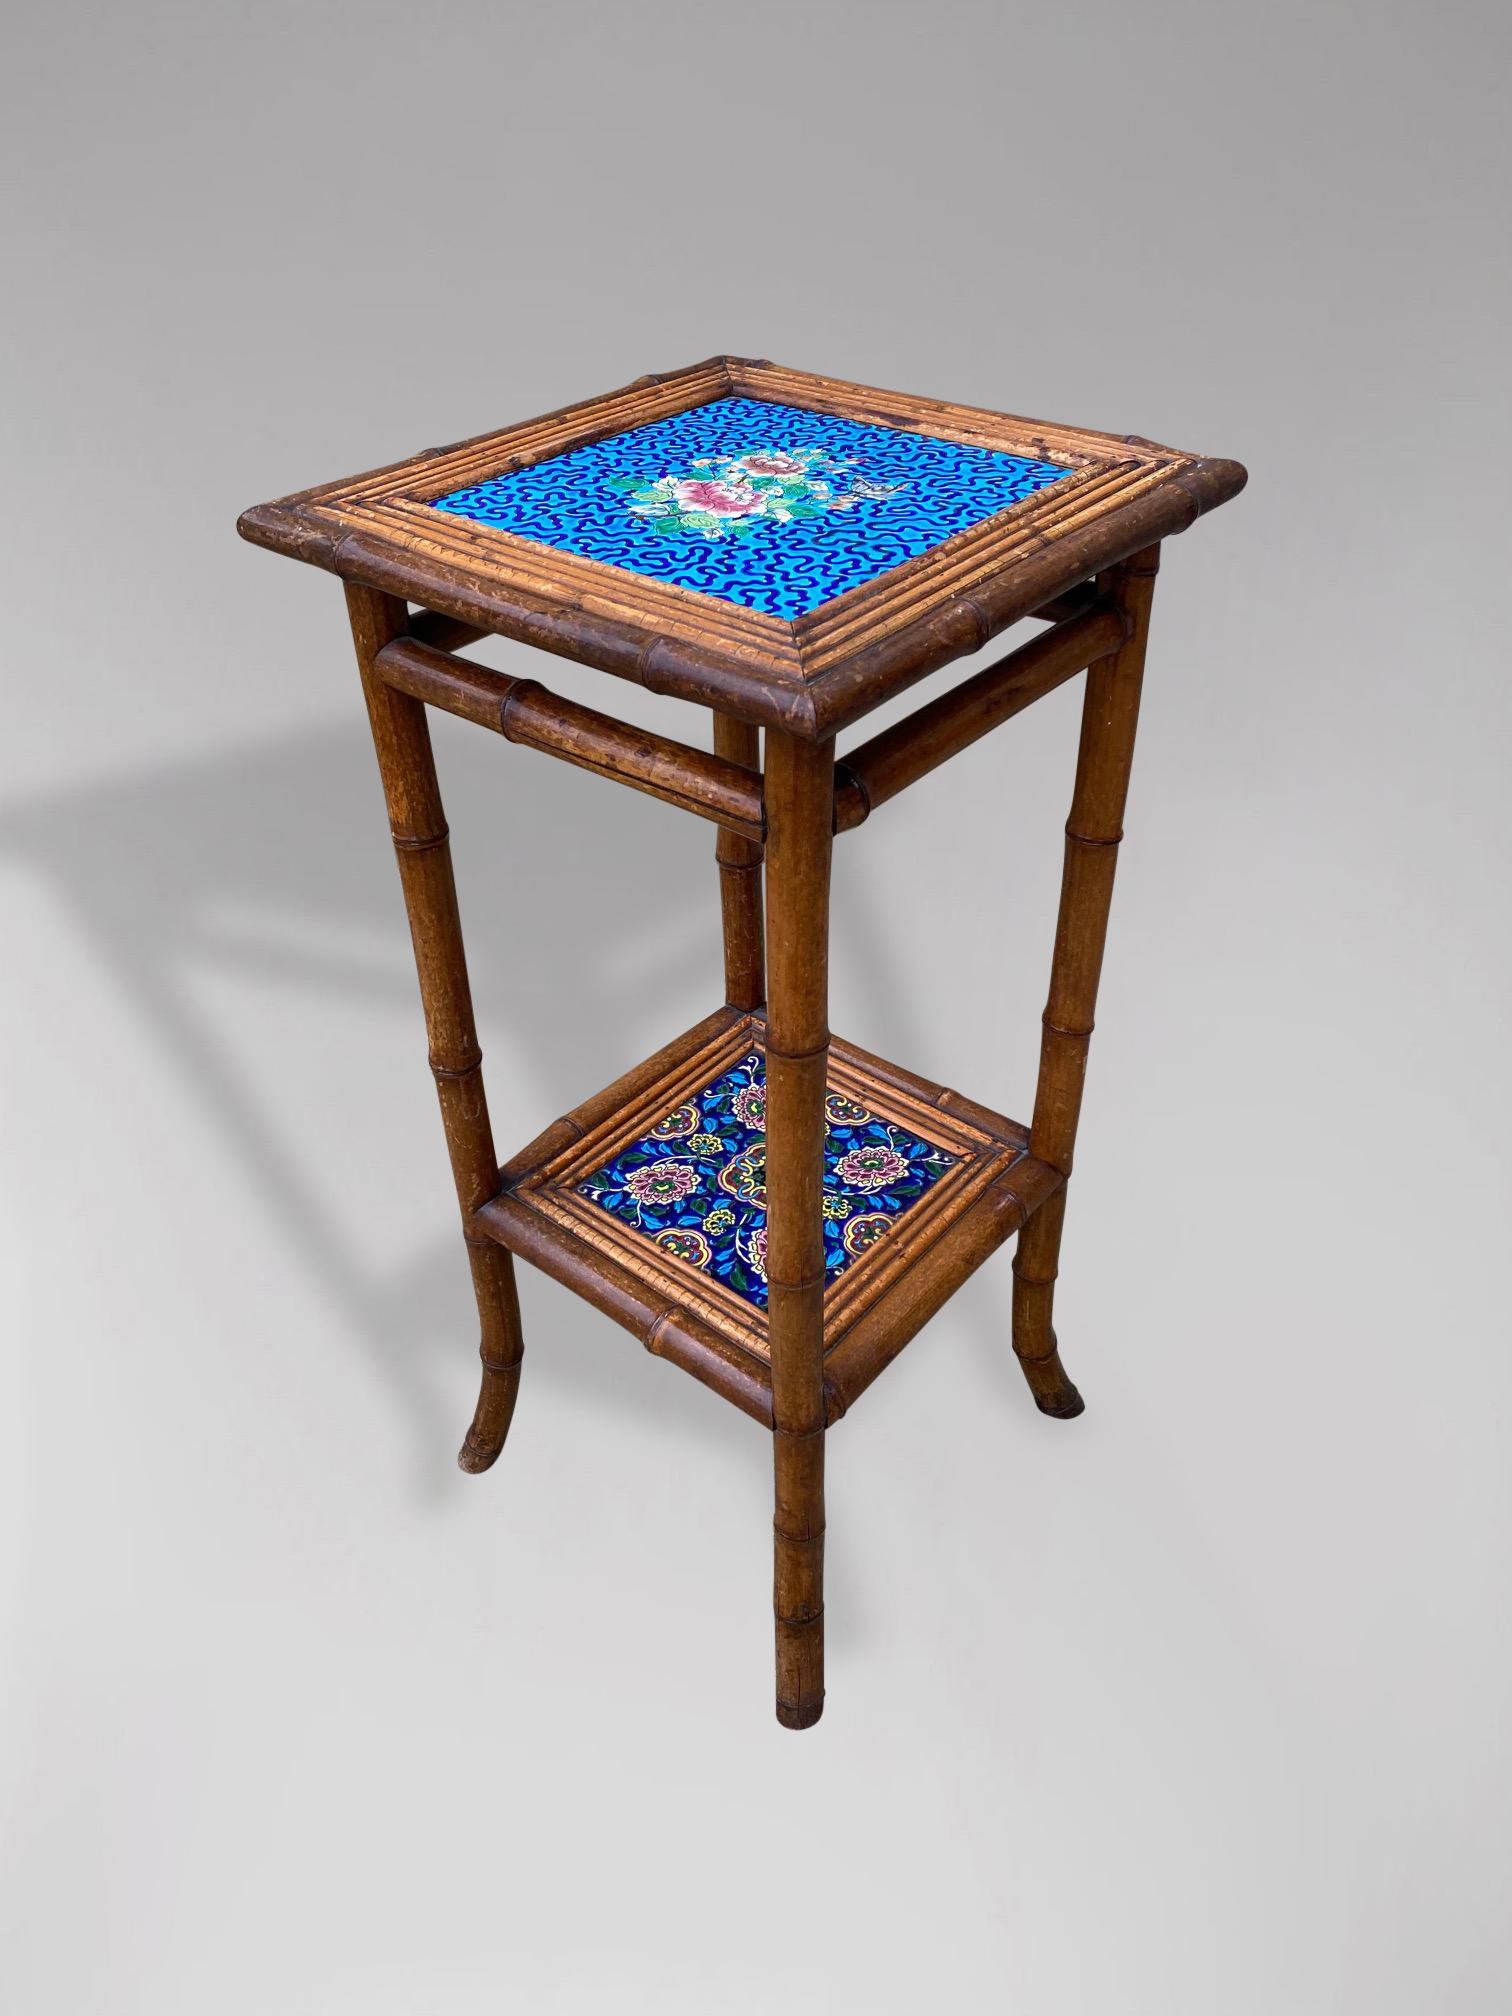 A wonderful antique tiled top bamboo side table or plant stand. A square two tier bamboo side table in excellent condition with antique hand painted ceramic tile inserts on top and bottom shelf units in bright blue colour tones. Circa 1900. Great